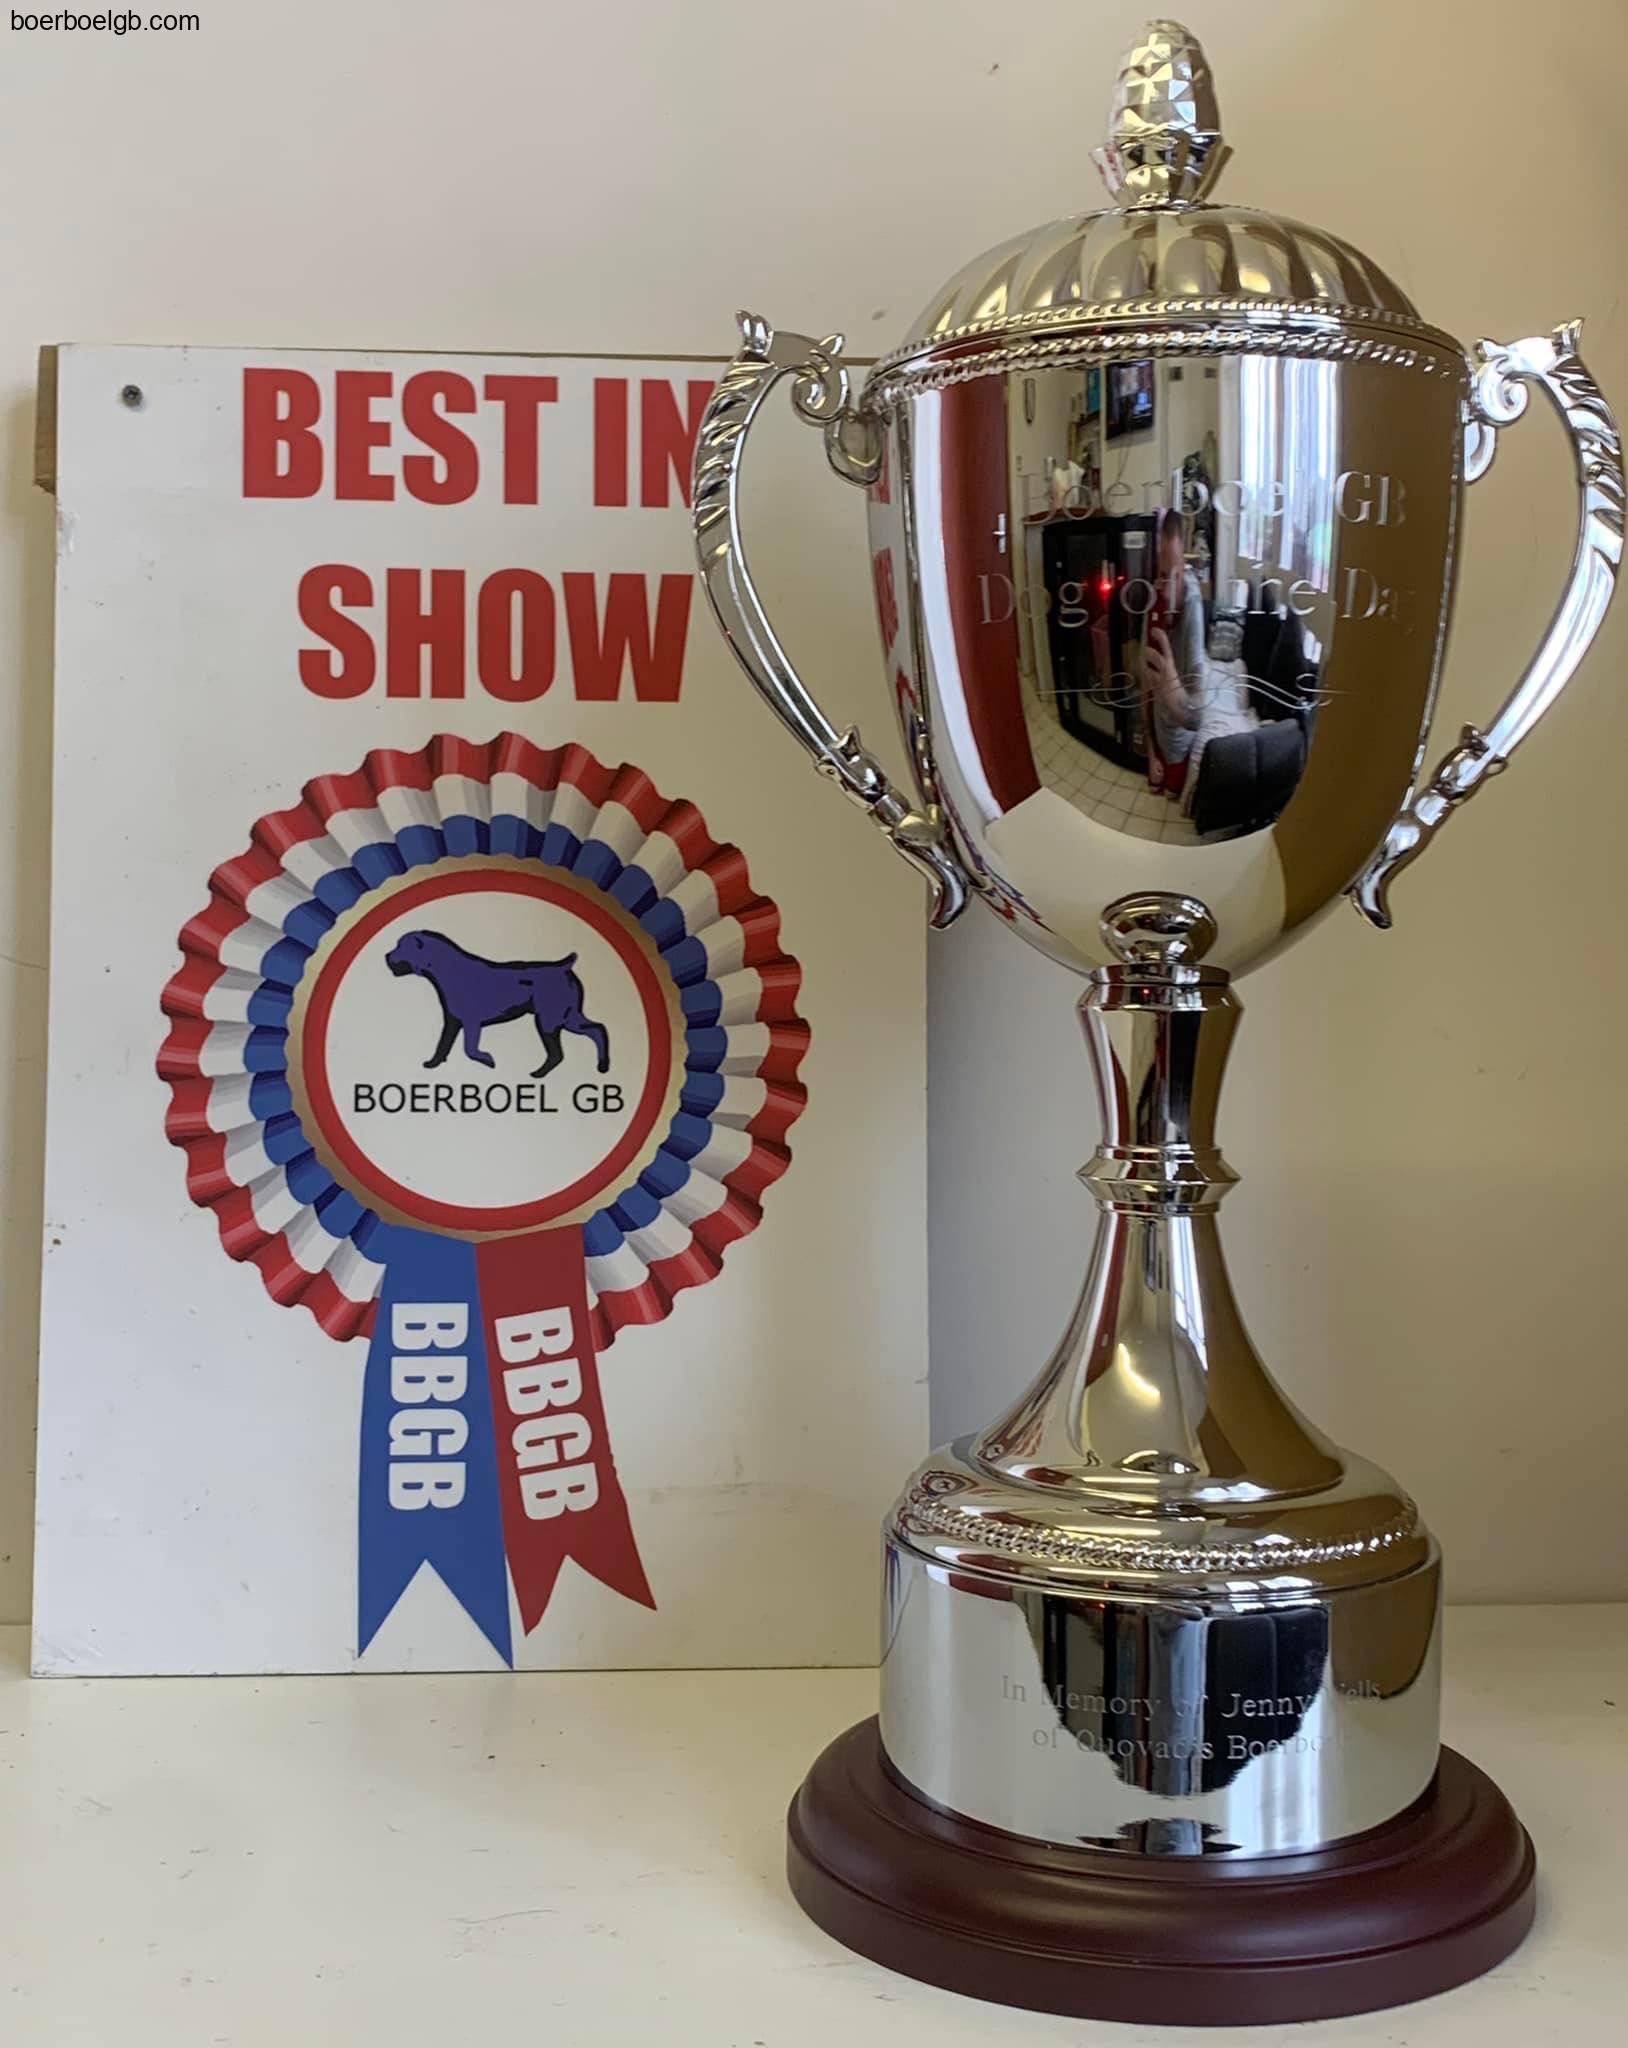 New UK record attendance at the 2022 Boerboel GB Show